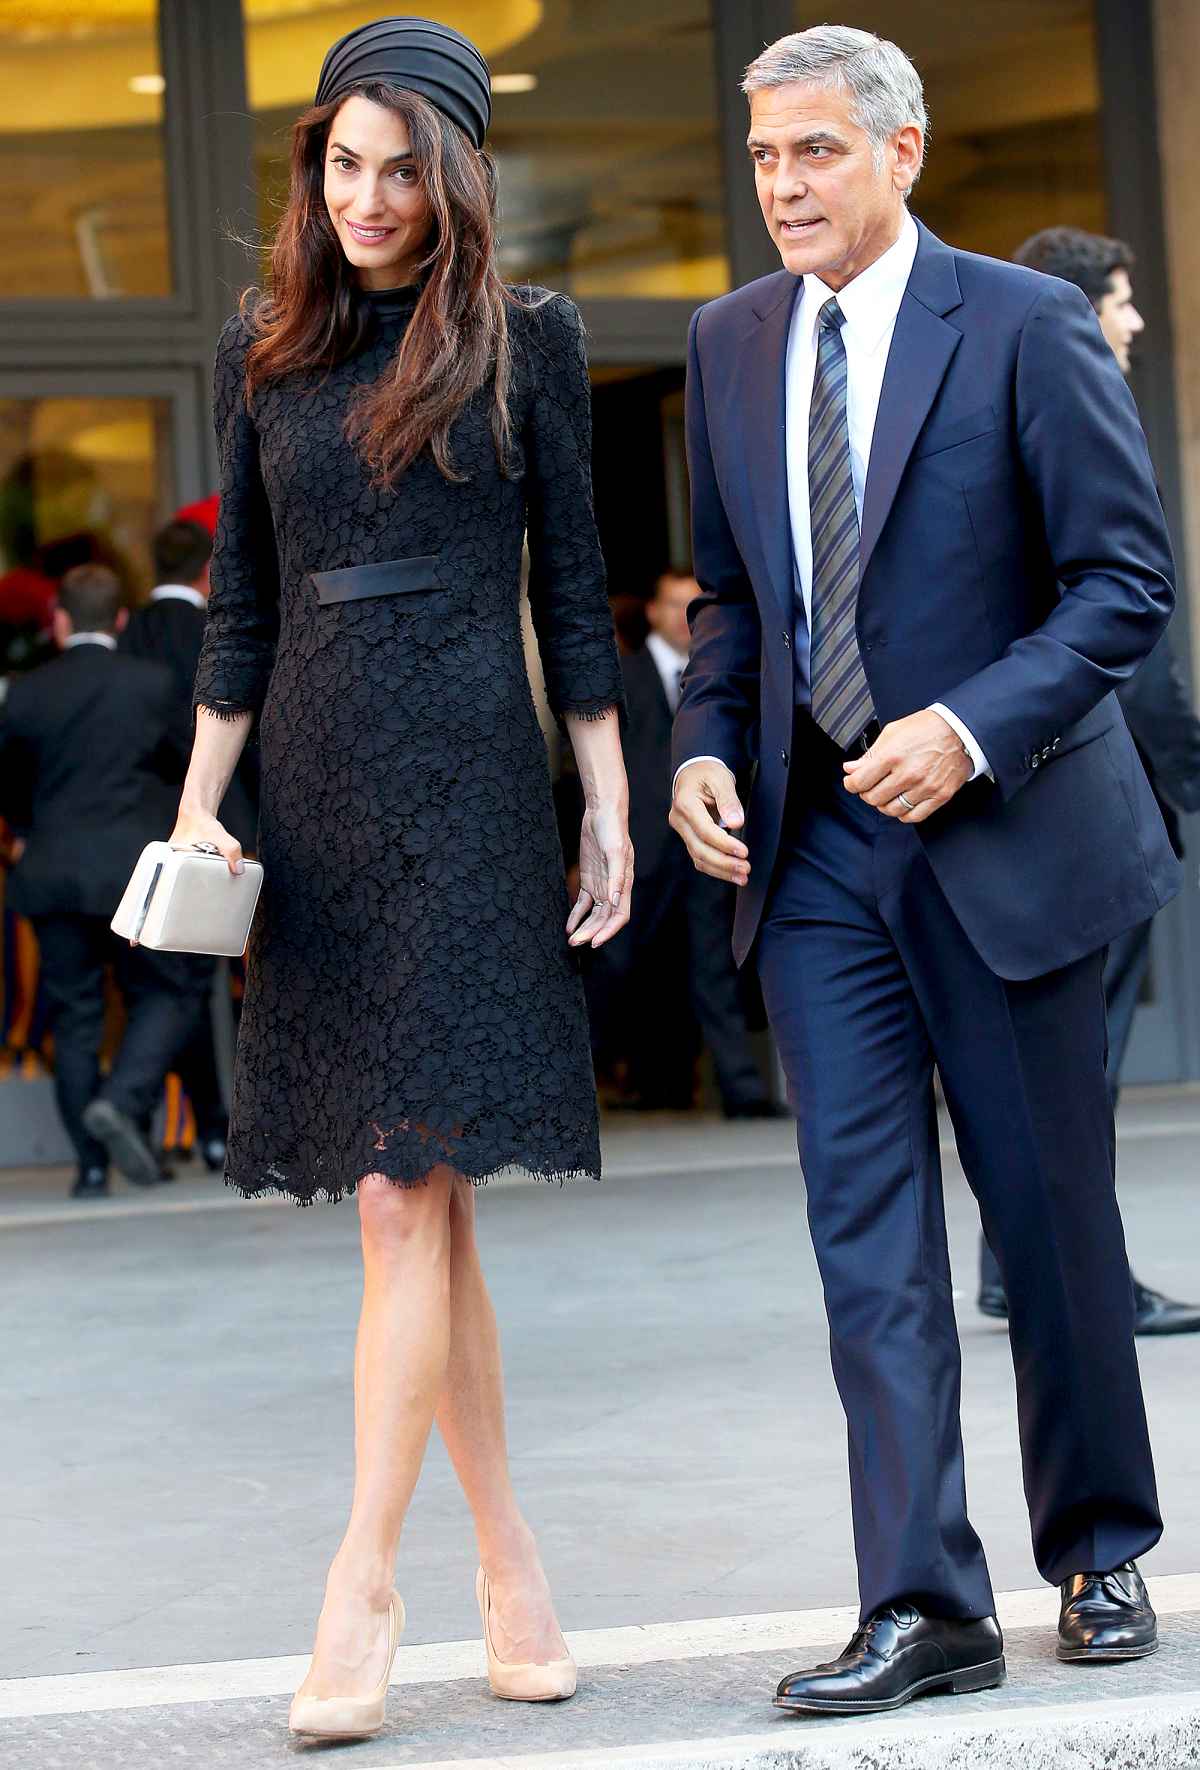 Back to serious business: Amal Clooney returns to London